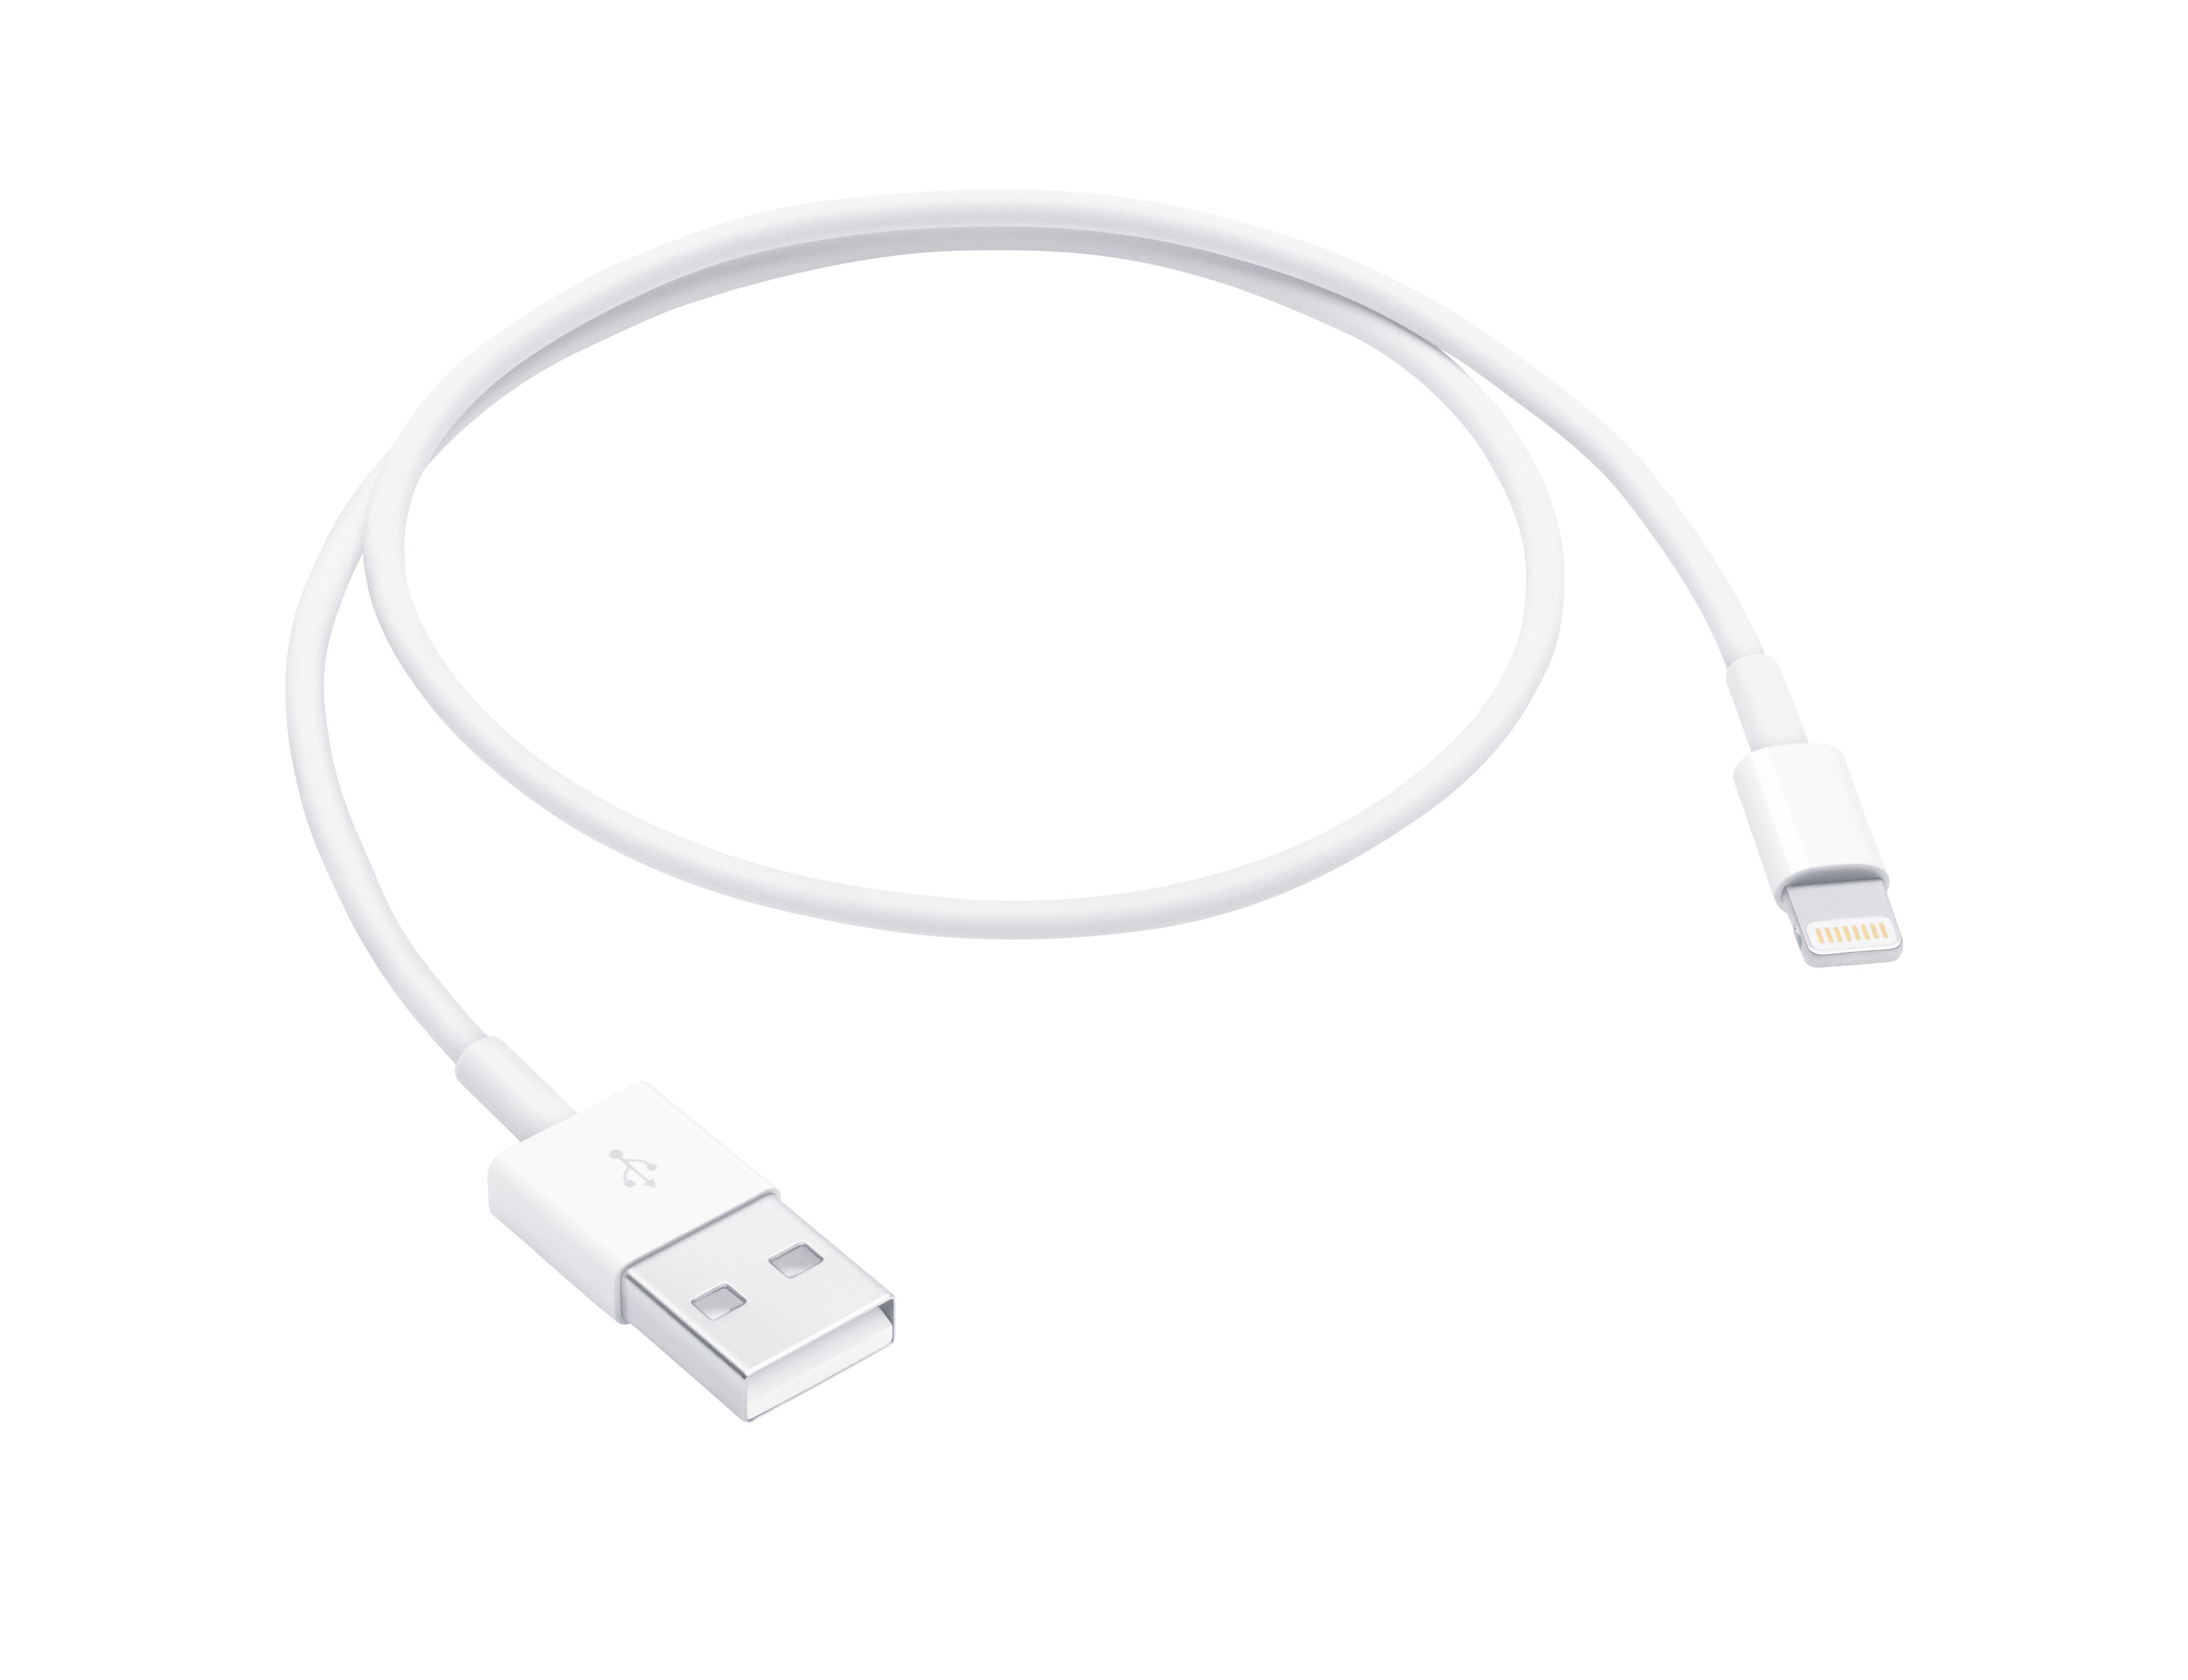 3 x iPhone Chargers - 3.3FT Lightening to USB-A Cables for iPhones, iPads, AirPods and more.